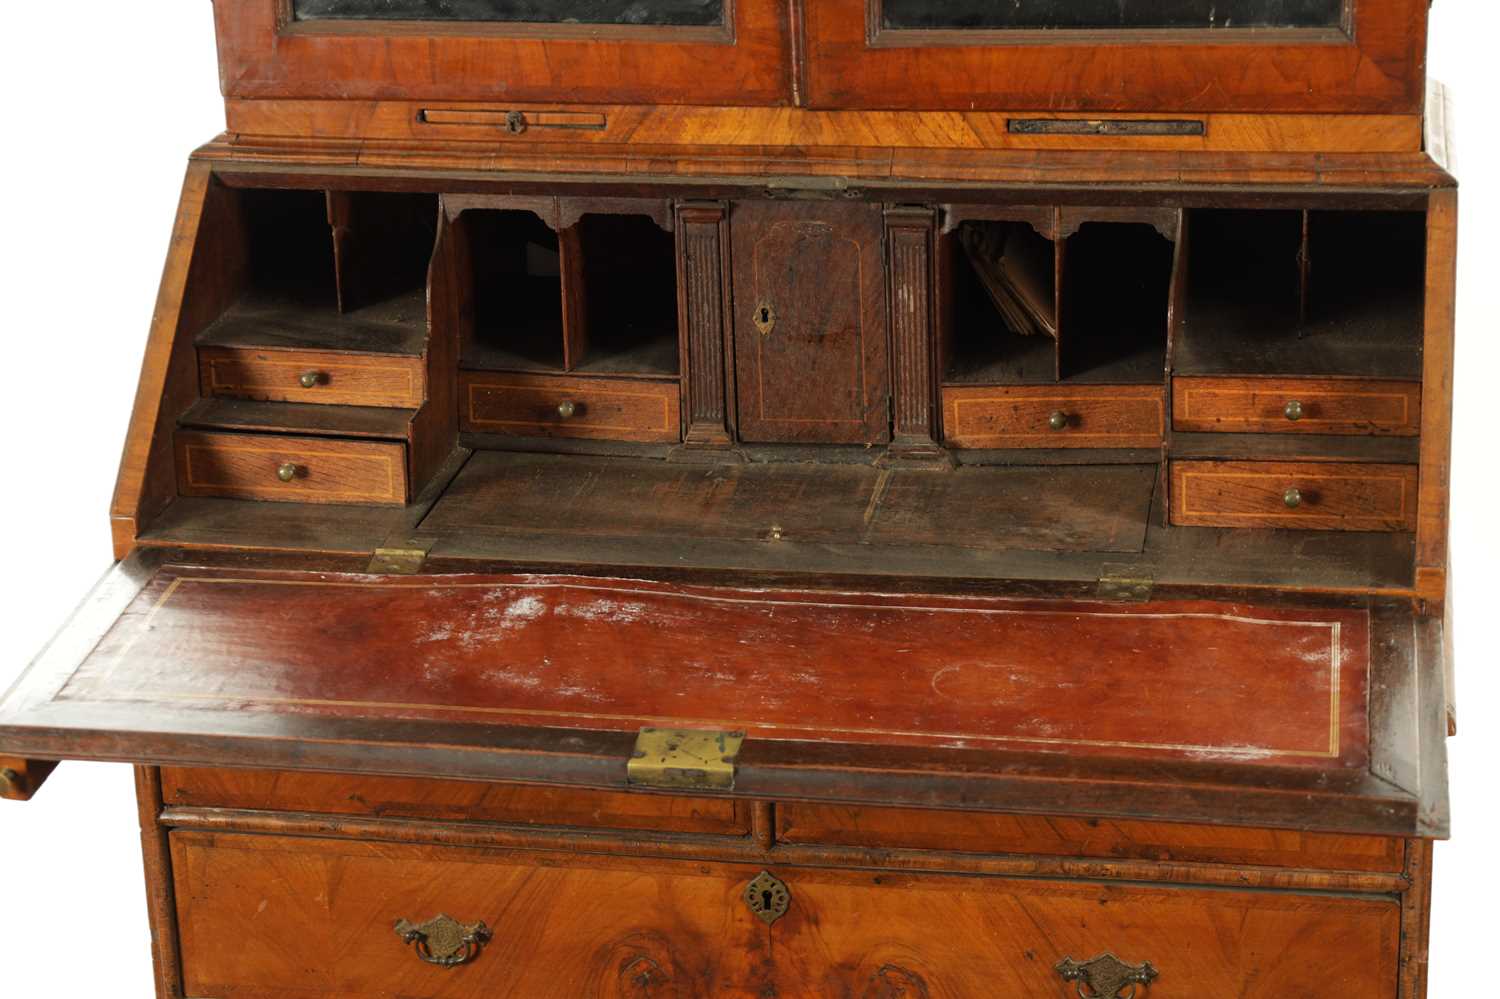 AN EARLY 18TH CENTURY FIGURED WALNUT AND OAK BREAK ARCHED TOP BUREAU BOOKCASE - Image 10 of 10